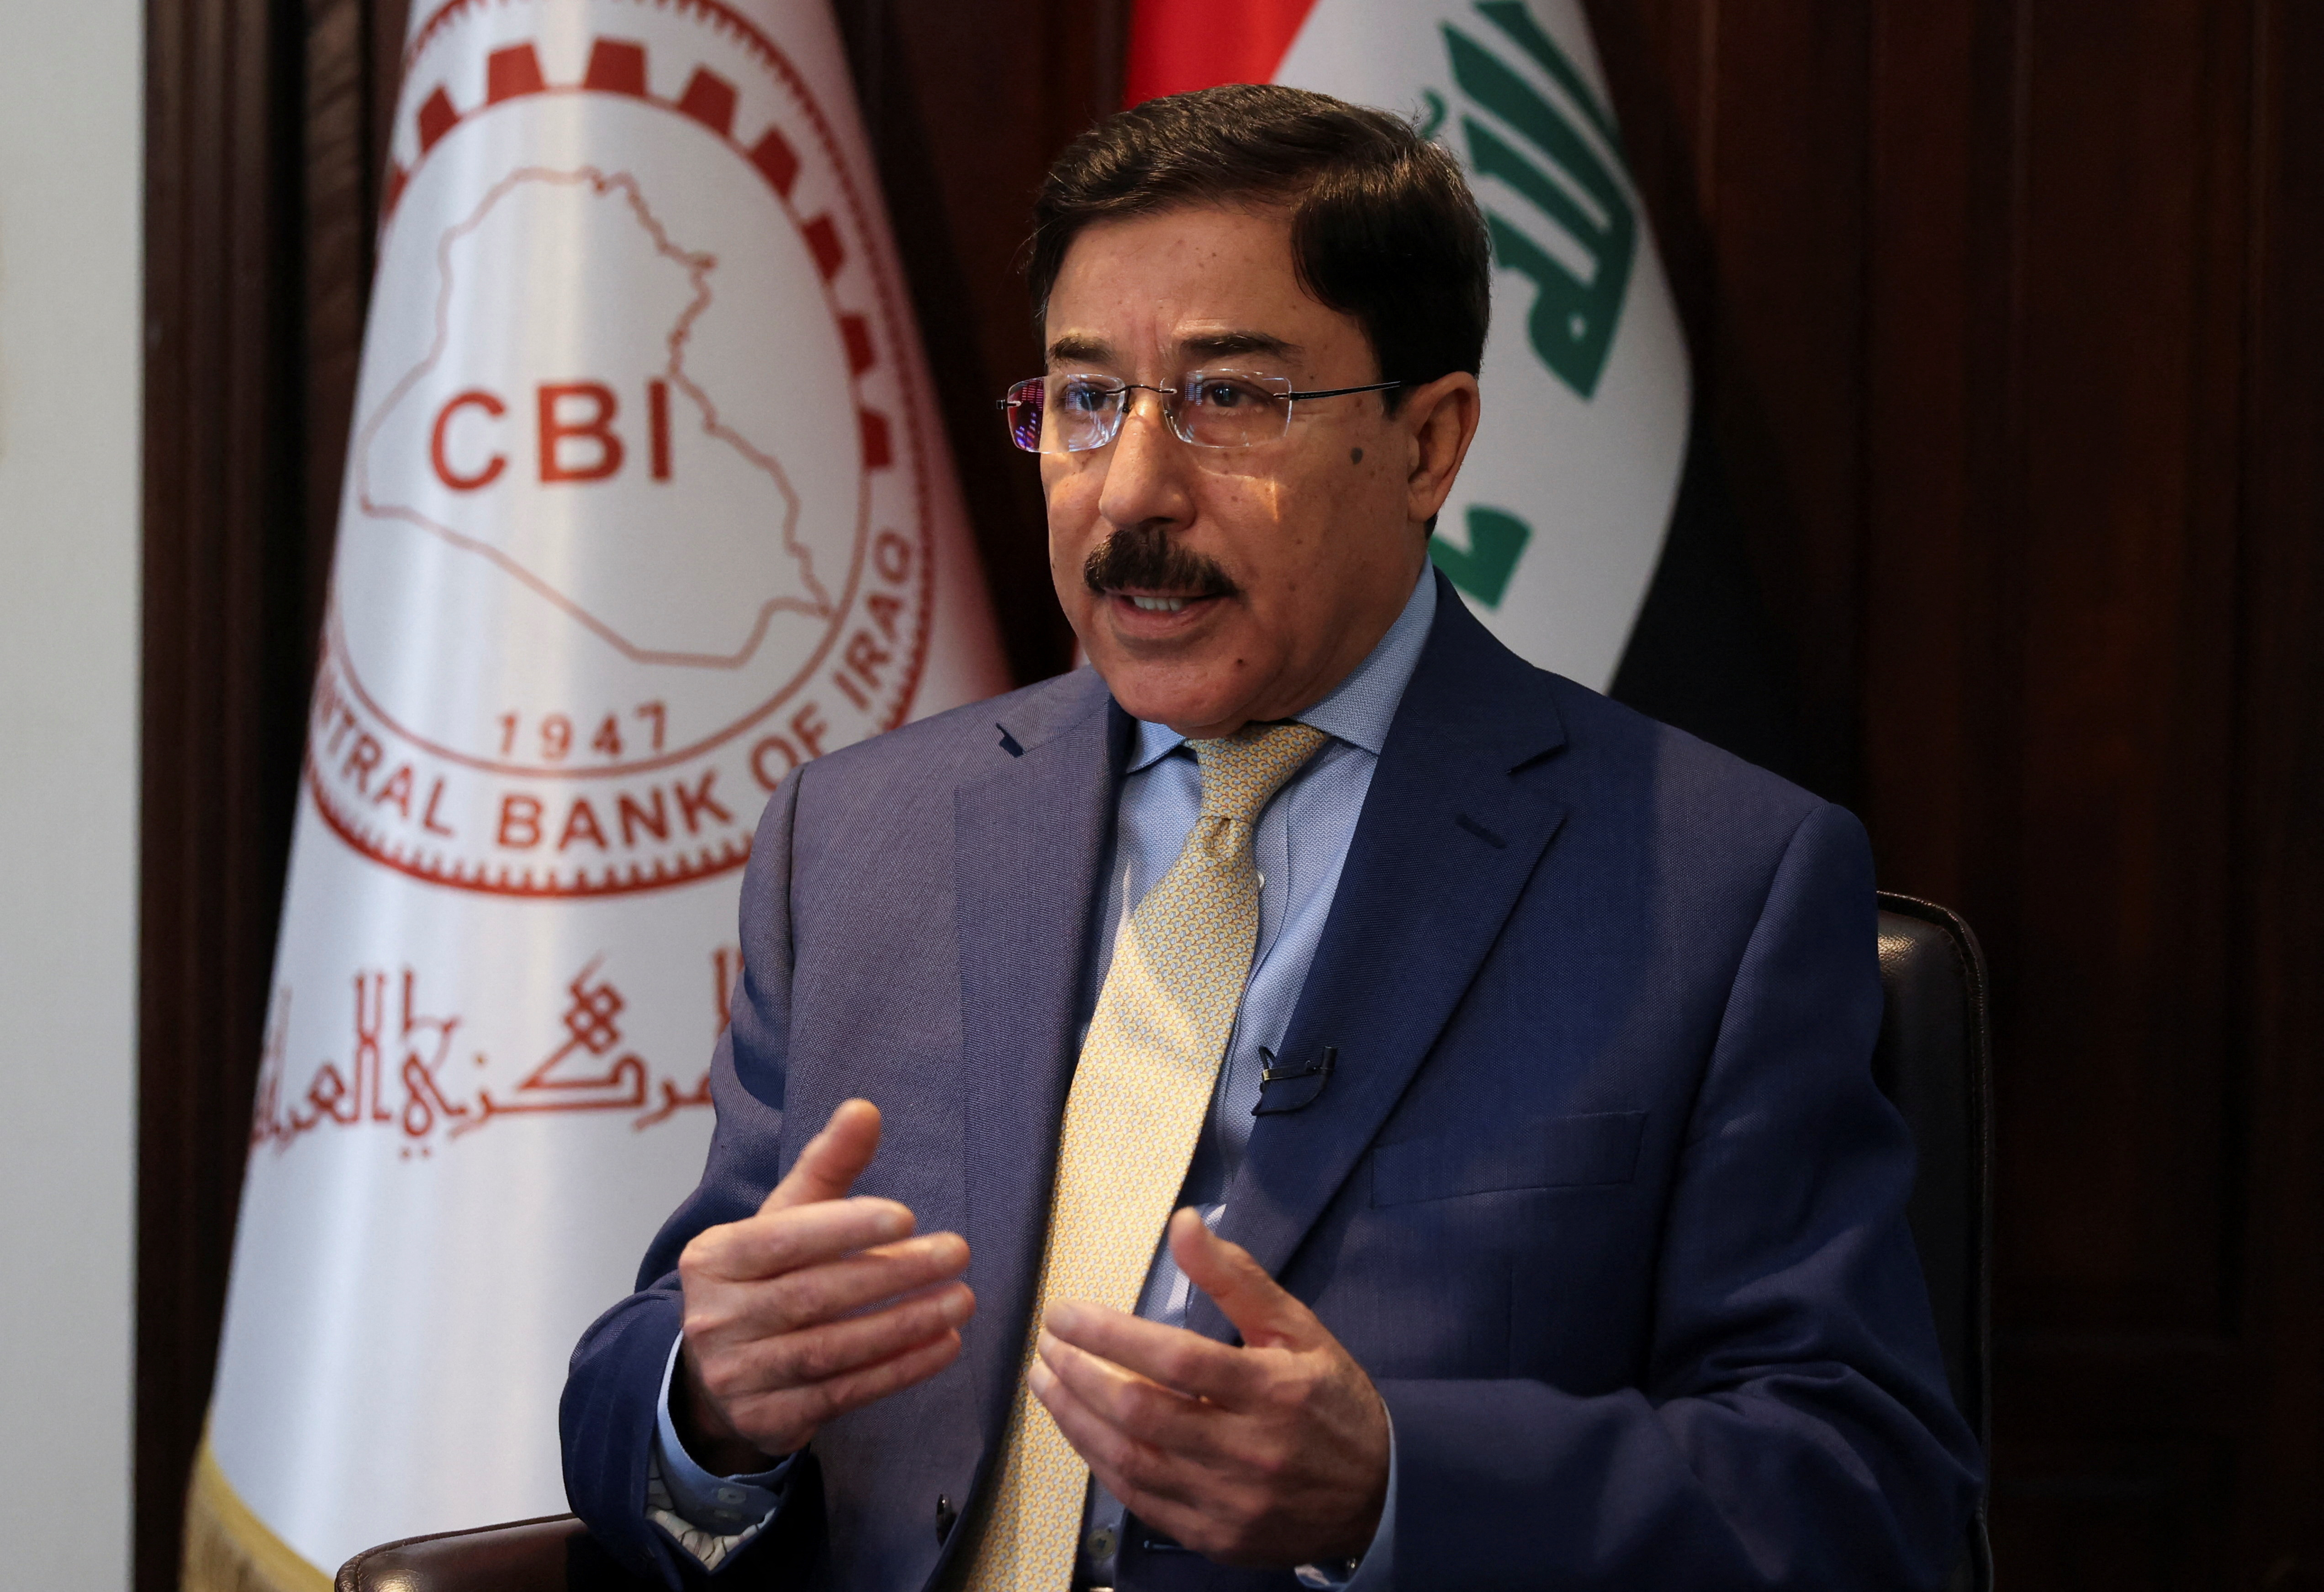 Iraqi central bank (CBI) Governor Ali Al-Allaq speaks during an interview with Reuters in Baghdad